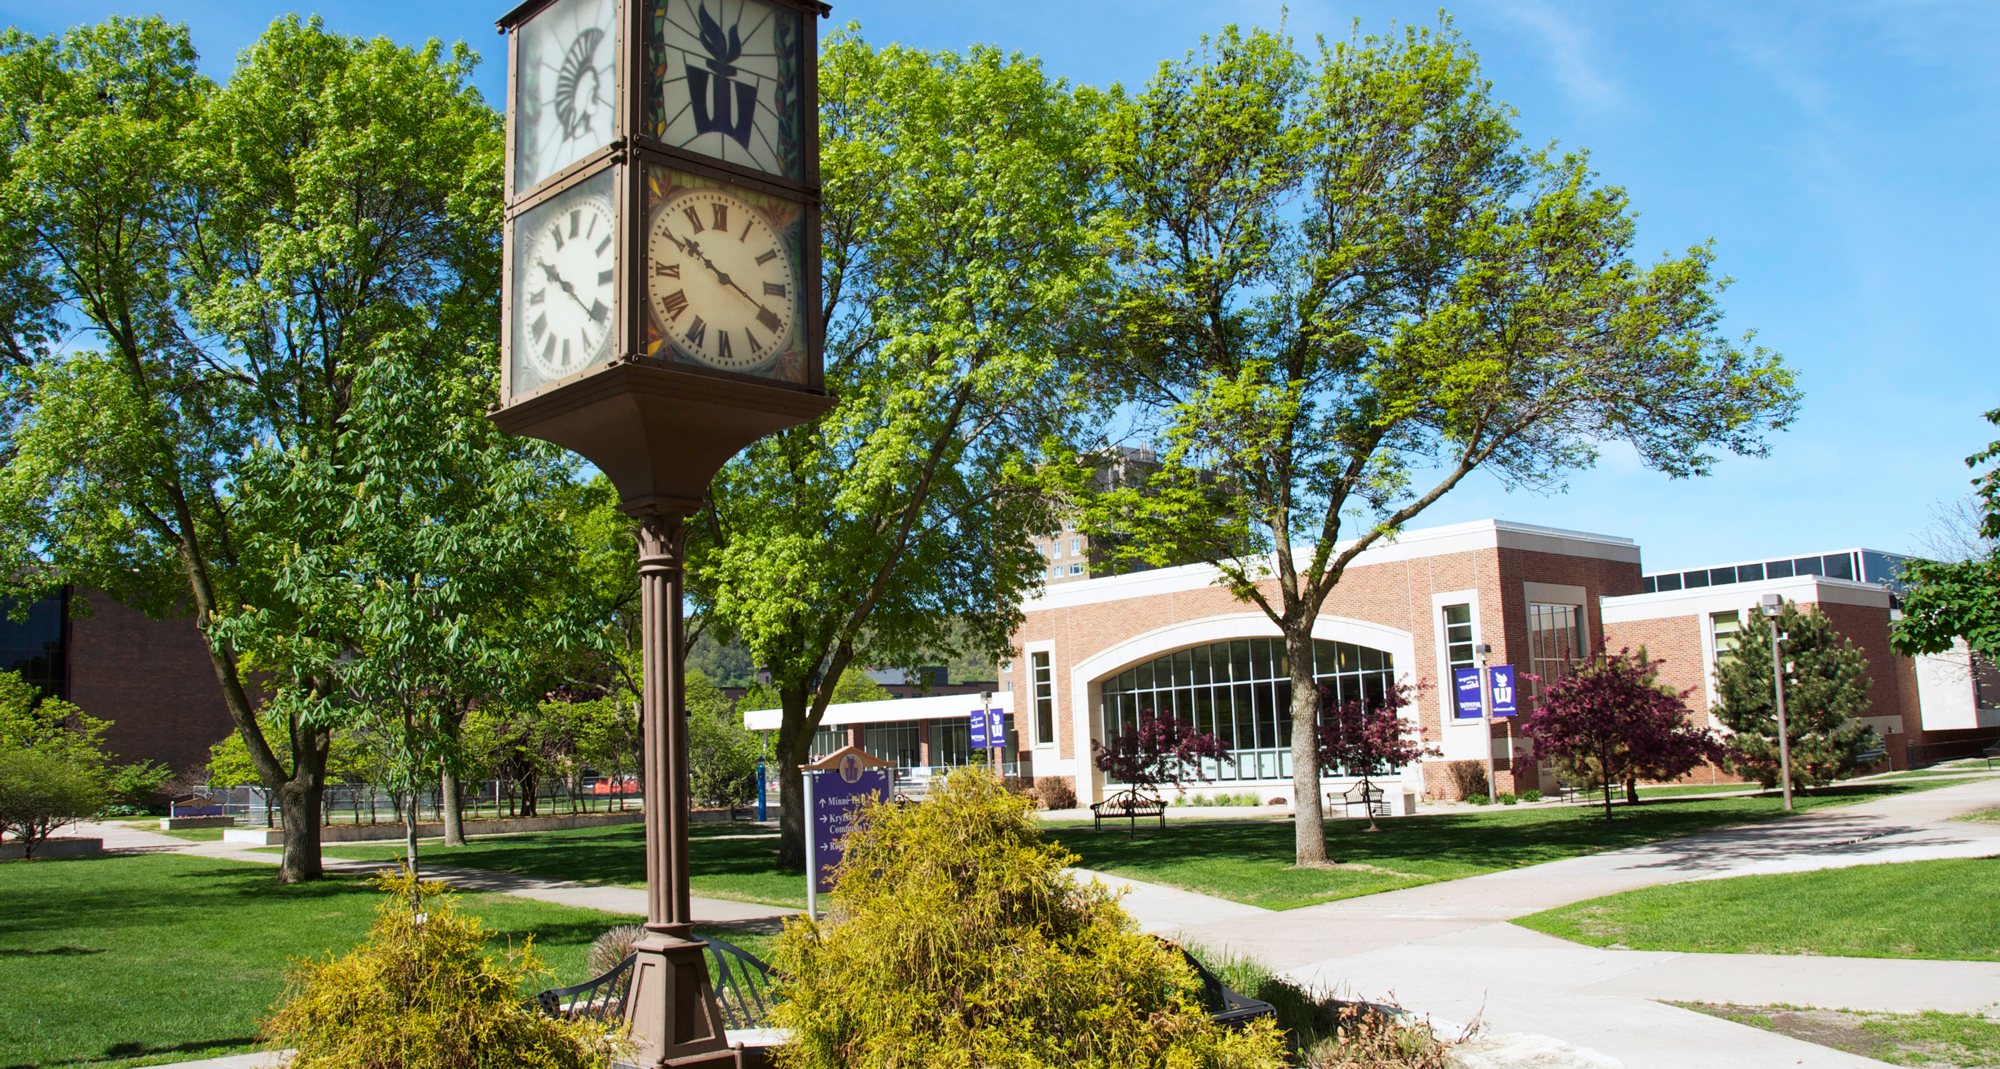 Campus clock tower in the summer.